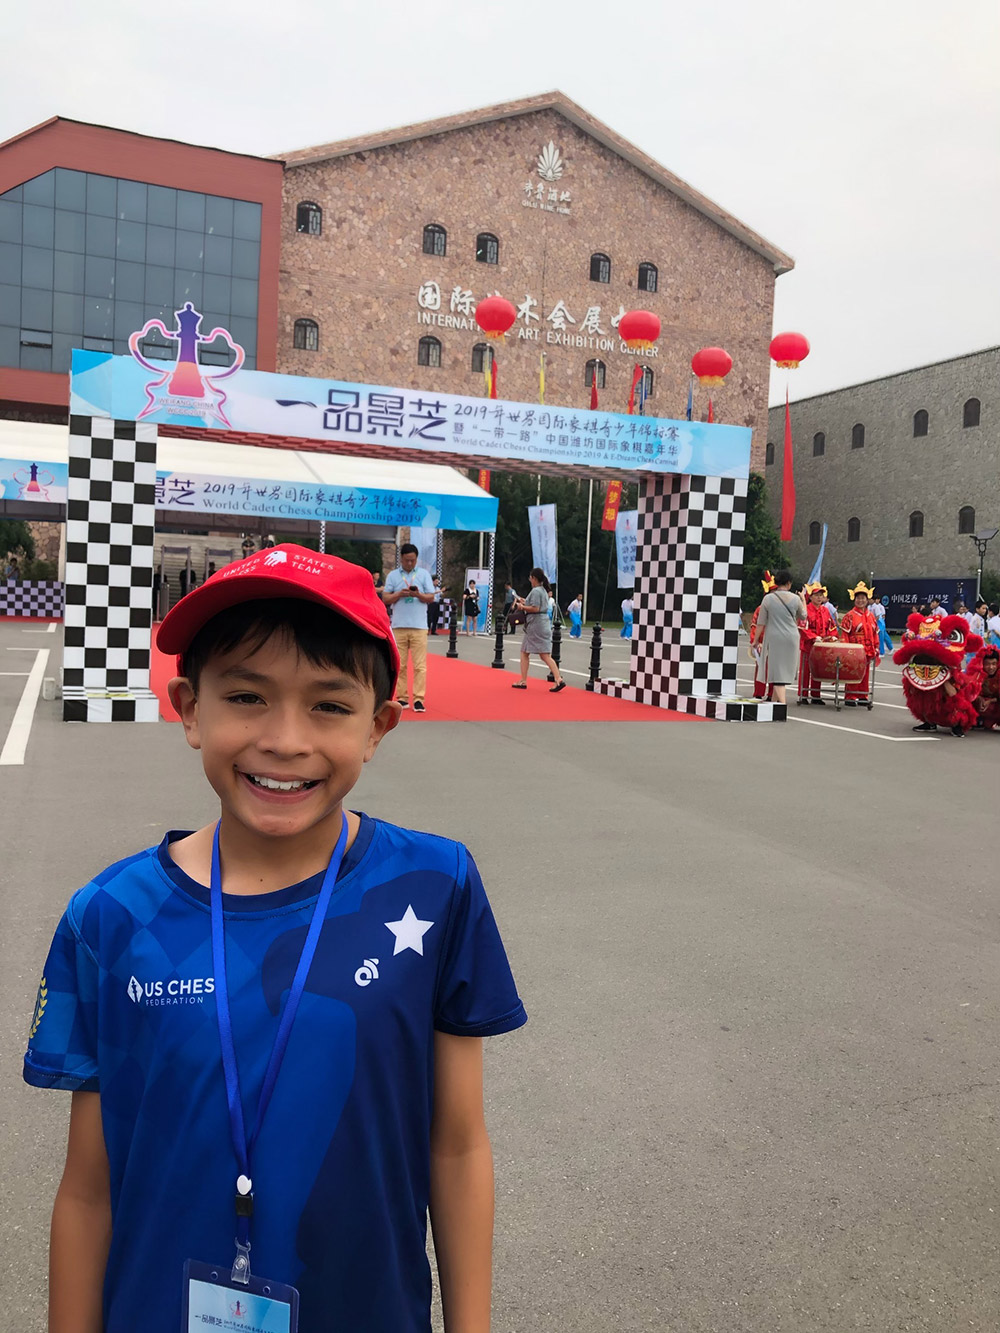 Oliver gets ready to enter the venue for the World Cadet Chess Championship in Weifang, China. August, 2019